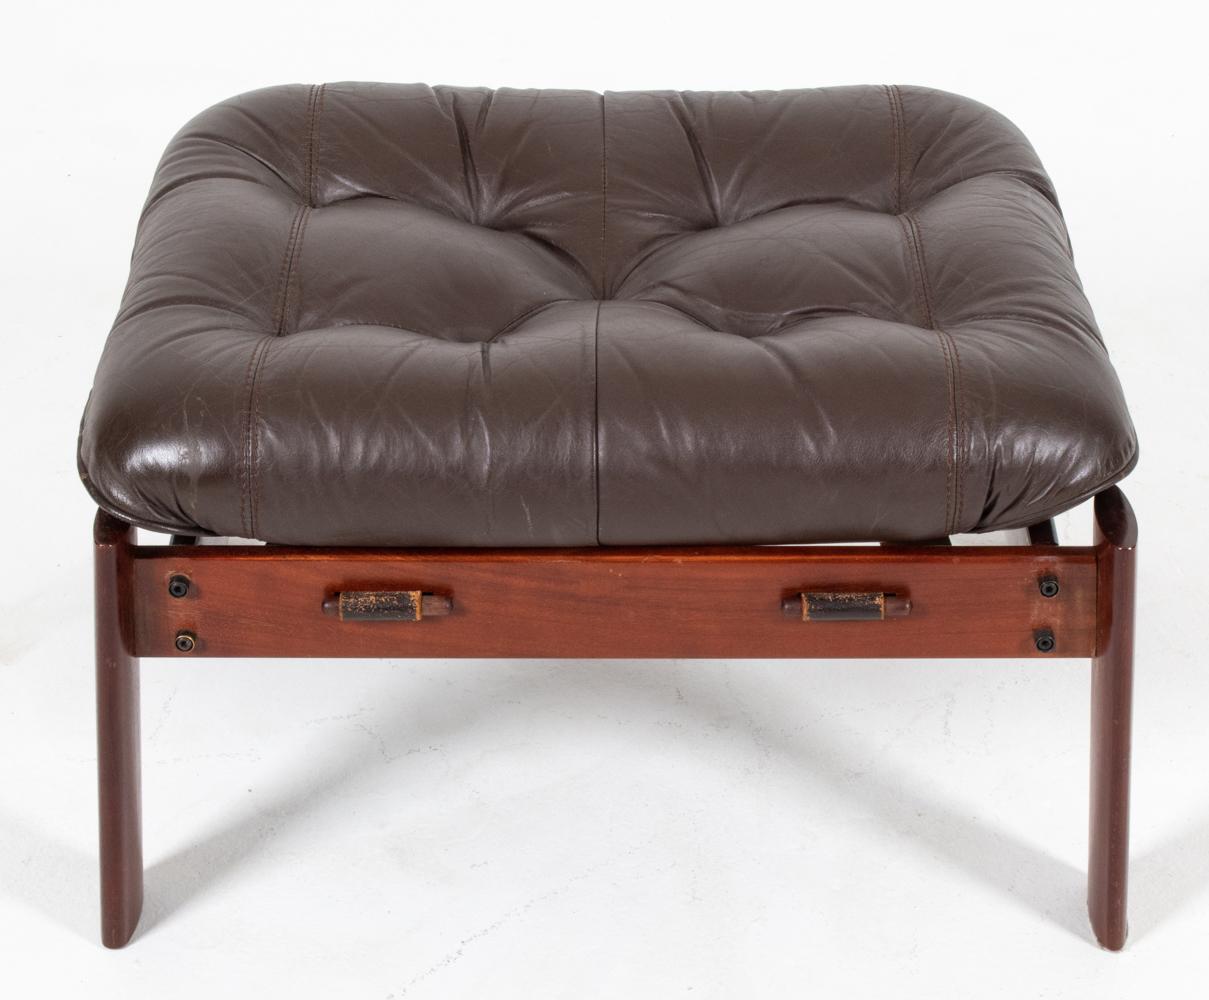 Percival Lafer MP-41 High-Back Seating Suite in Pau Ferro Wood & Leather 11